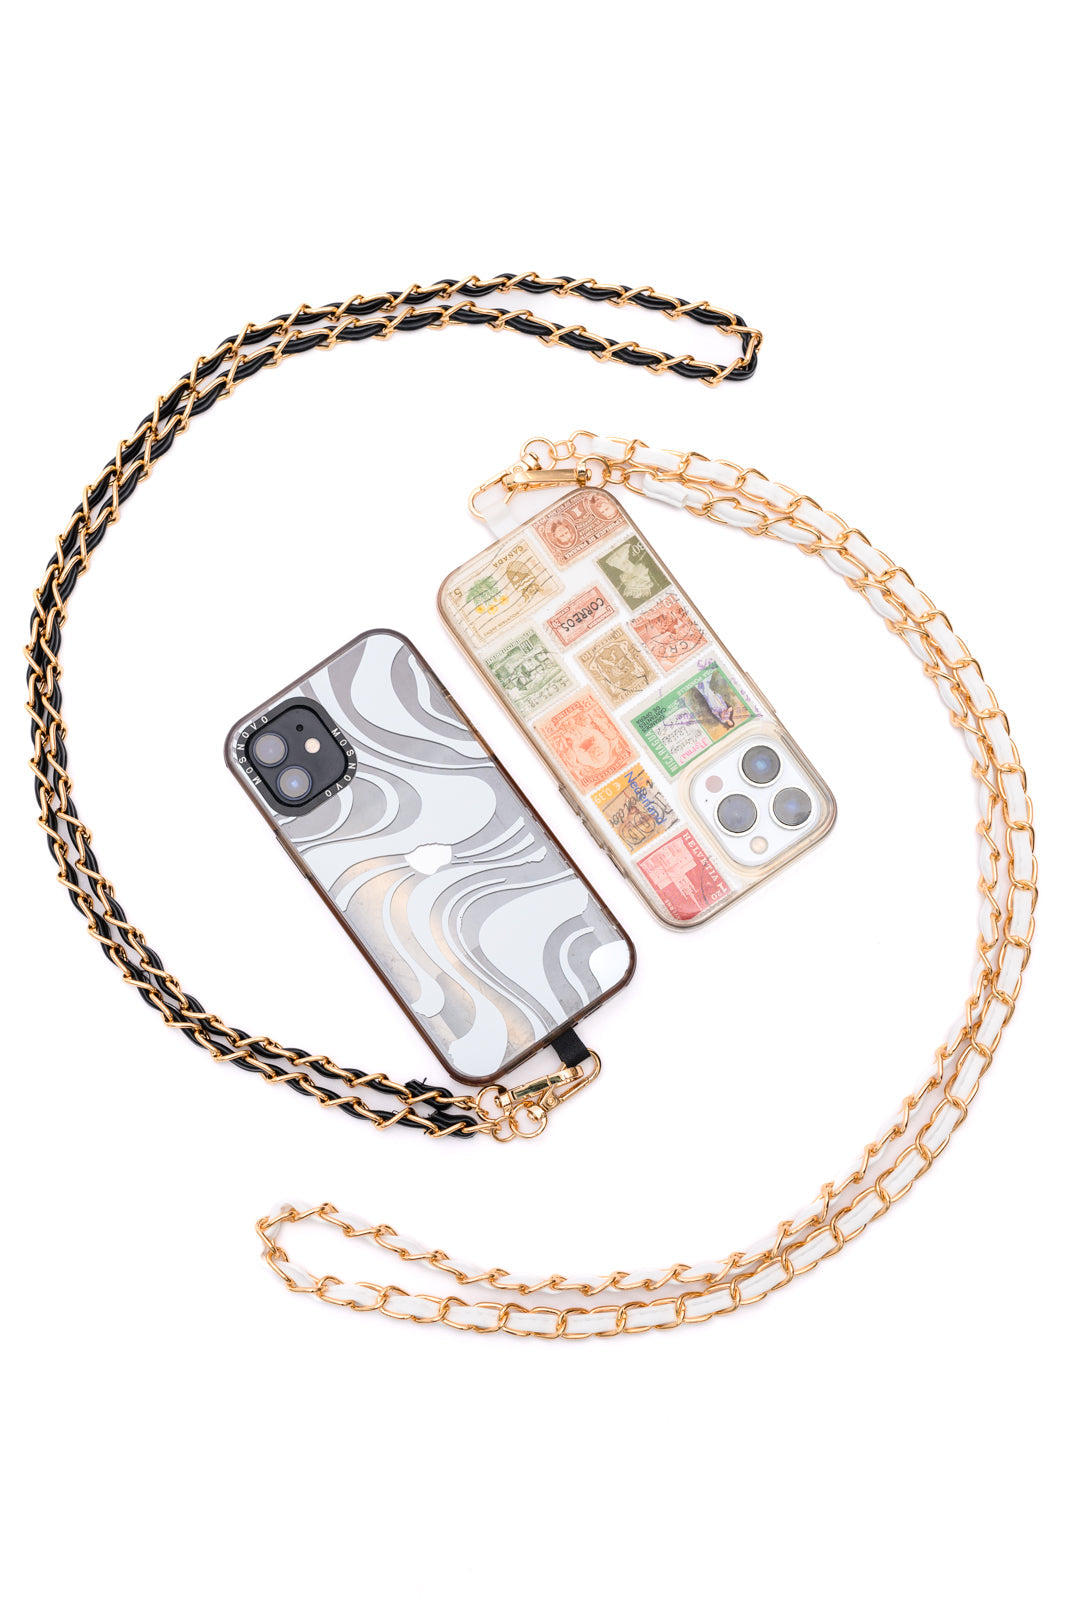 PU Leather Gold Chain Cell Phone Lanyard Set of 2